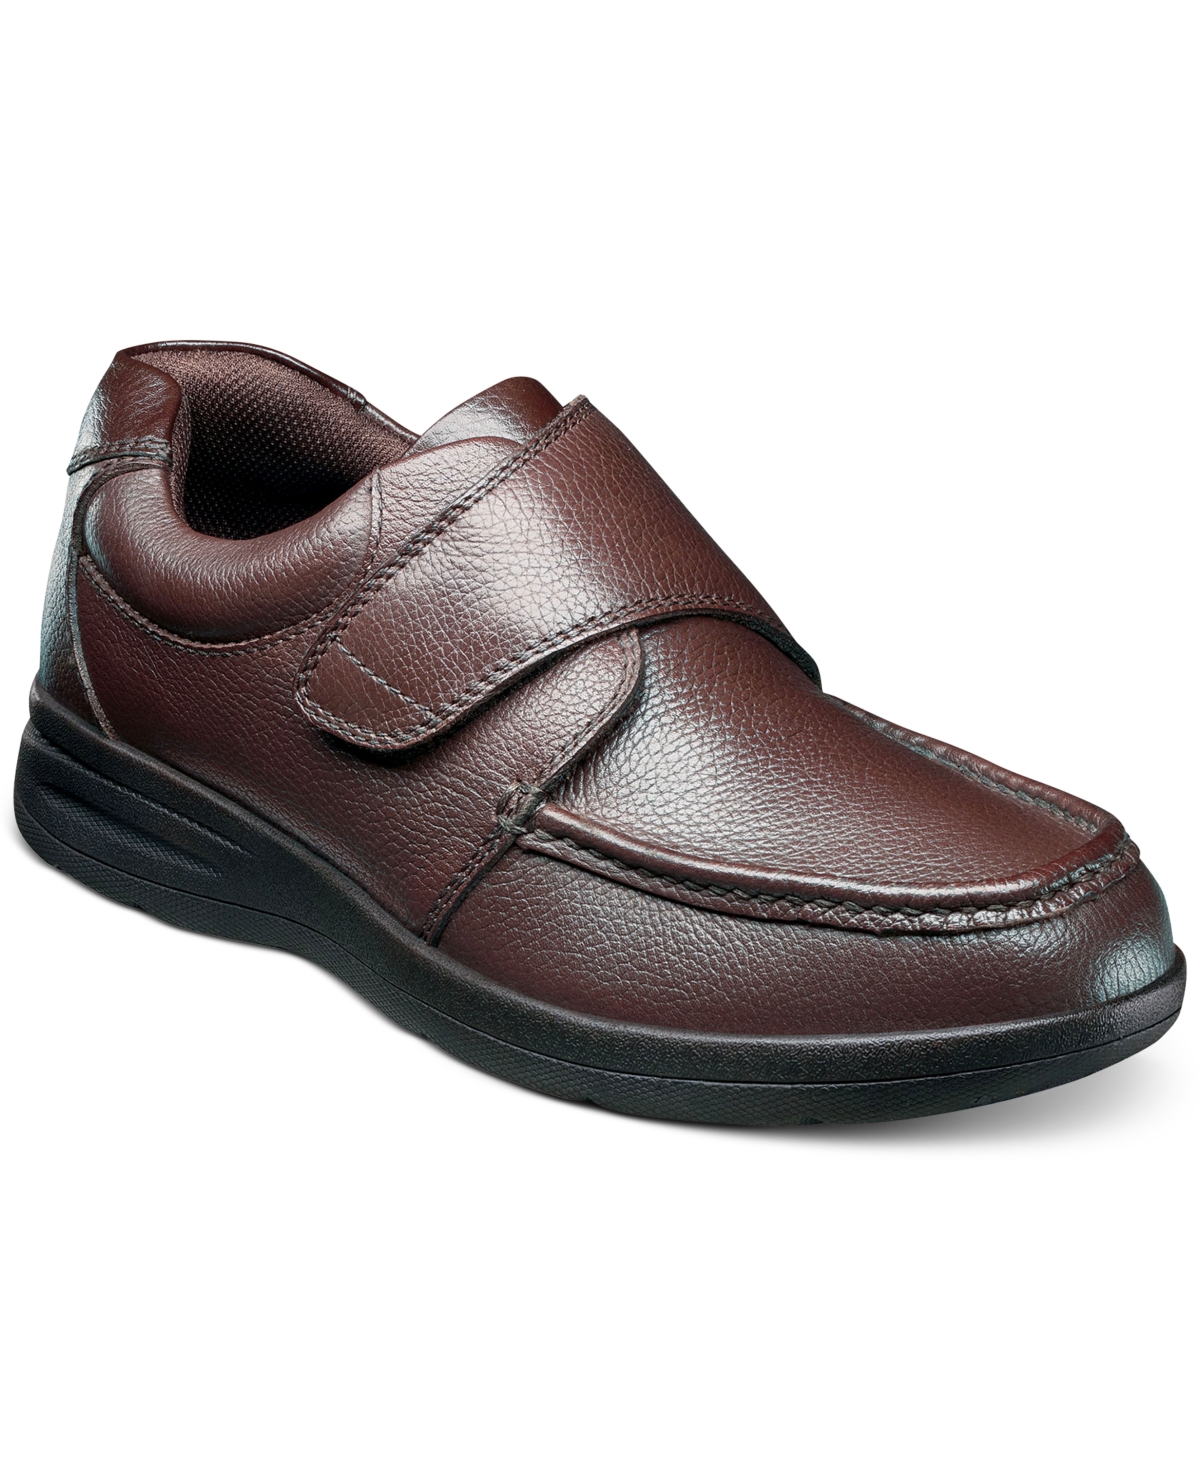 Men's Cam-Strap Moc-Toe Lightweight Loafers - Brown Tumble